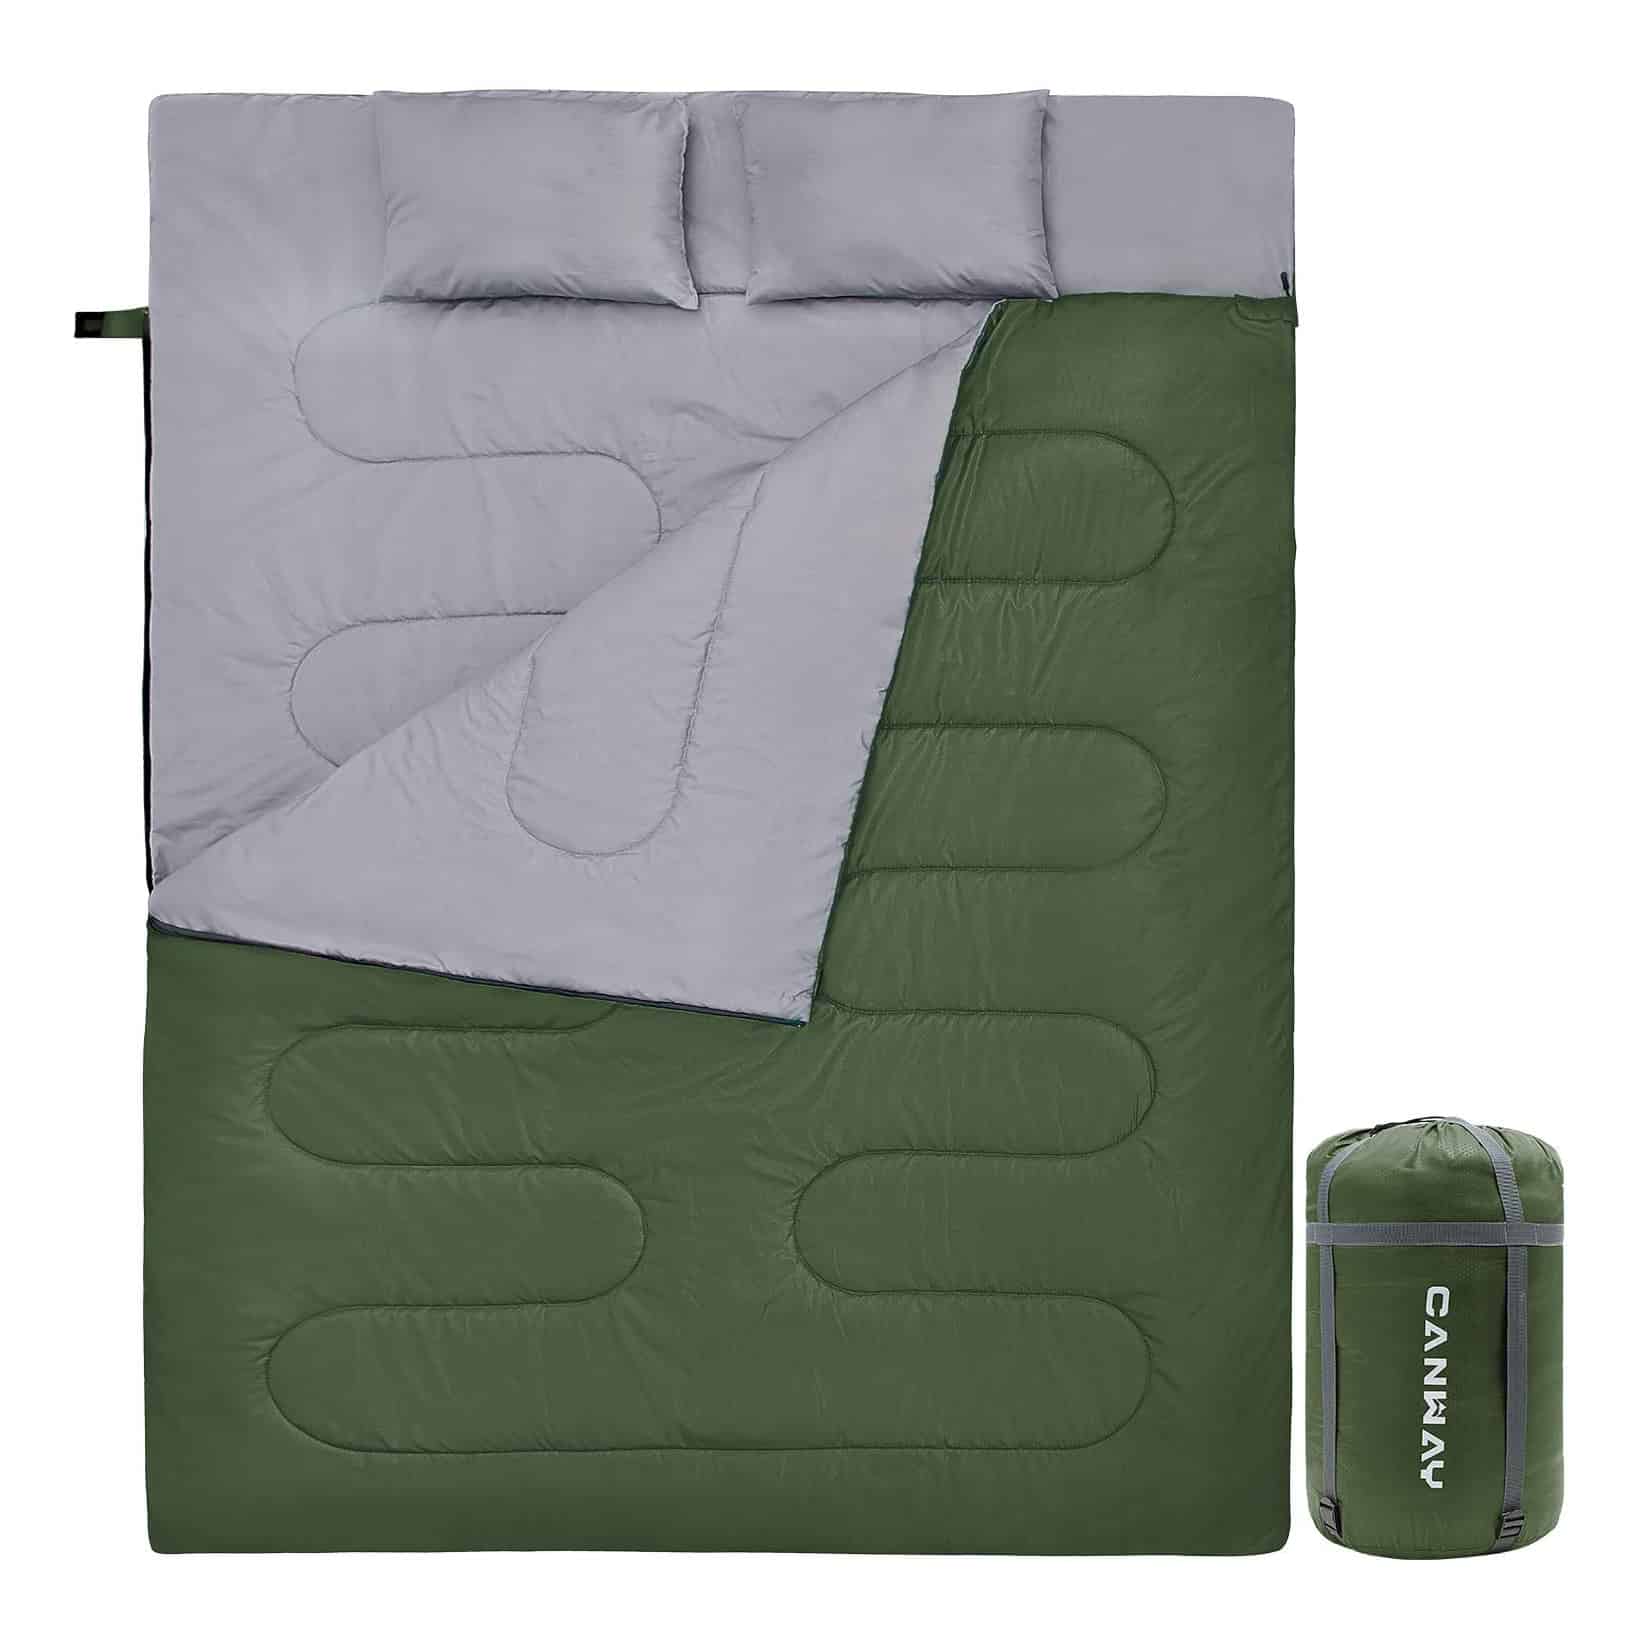 The Best Double Sleeping Bags in 2022 Reviews